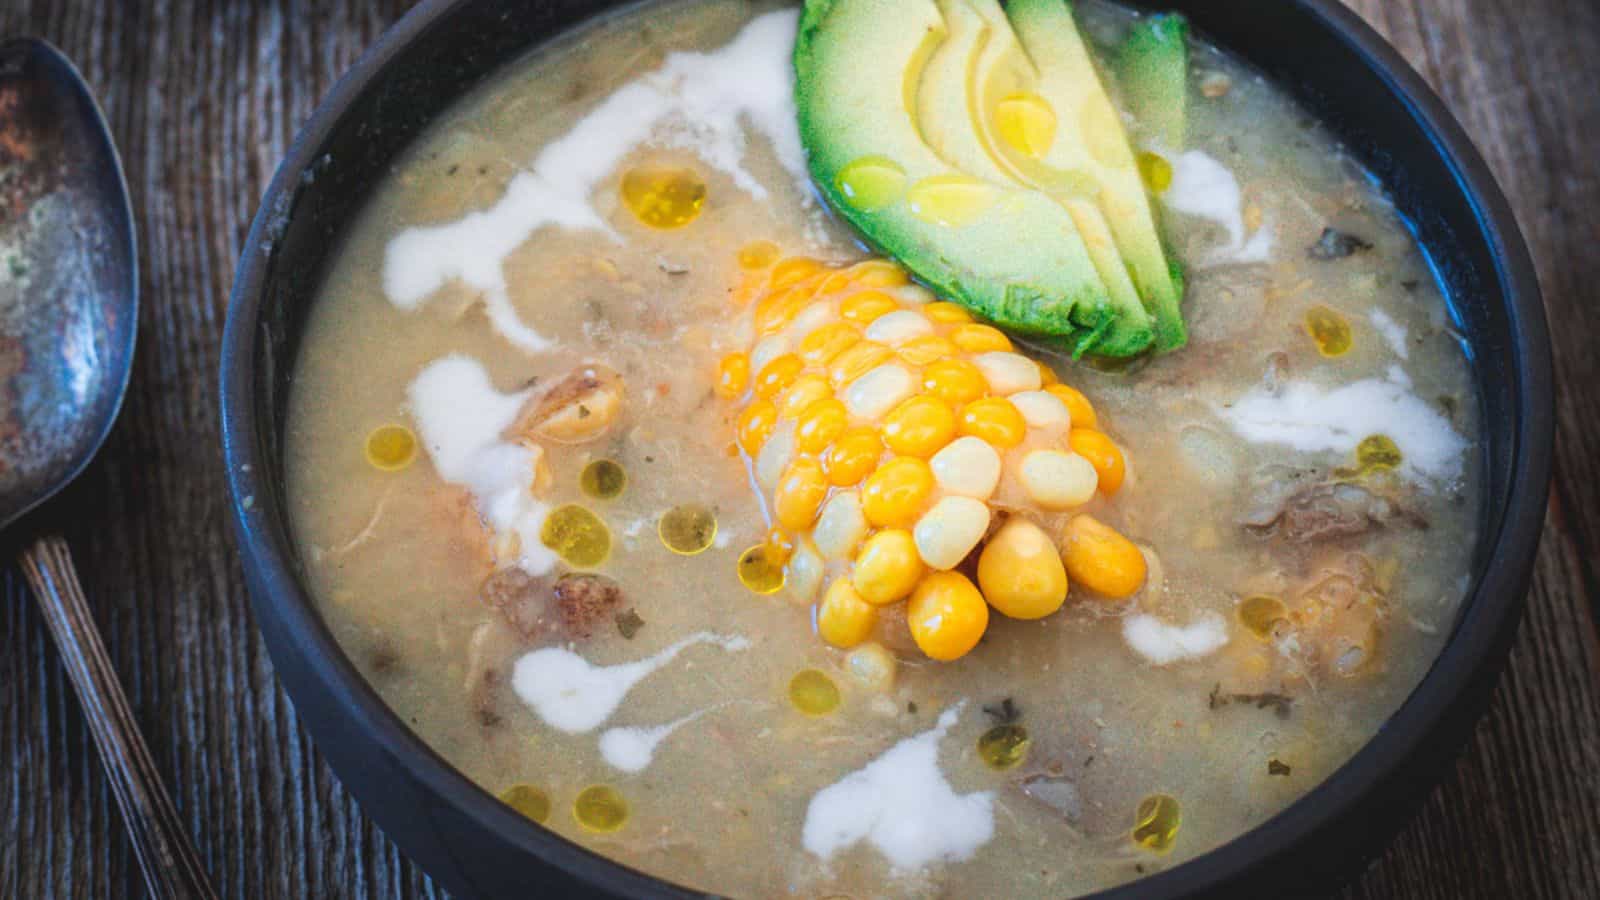 A bowl of traditional South American soup with corn, avocado, and chicken, garnished with herbs and a creamy drizzle.